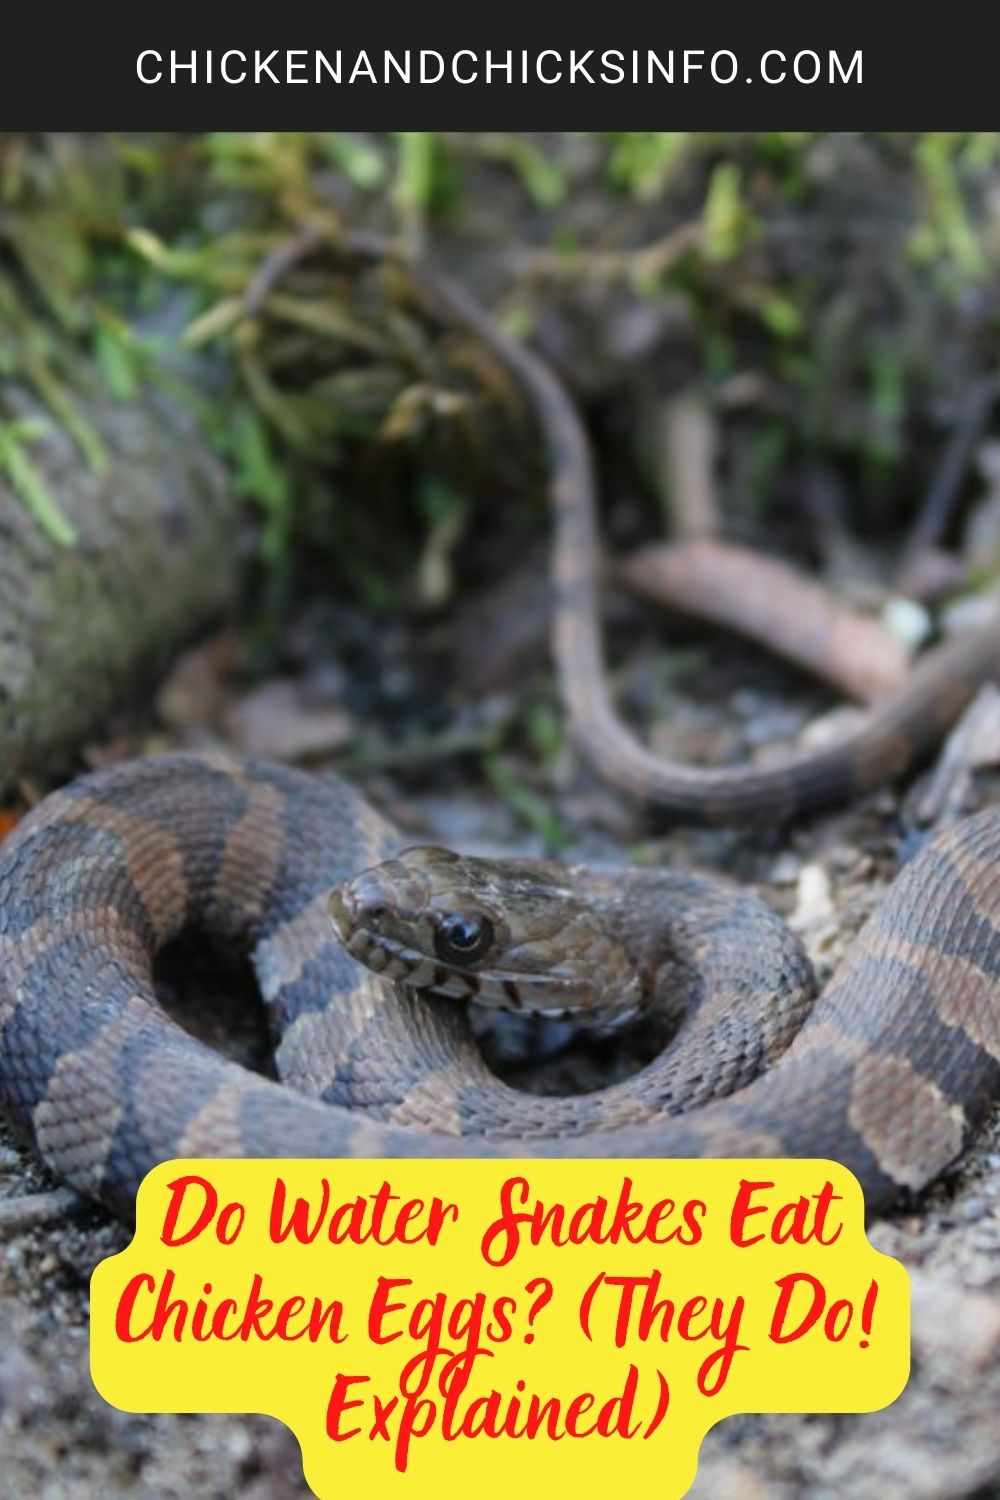 Do Water Snakes Eat Chicken Eggs? (They Do! Explained) poster.
